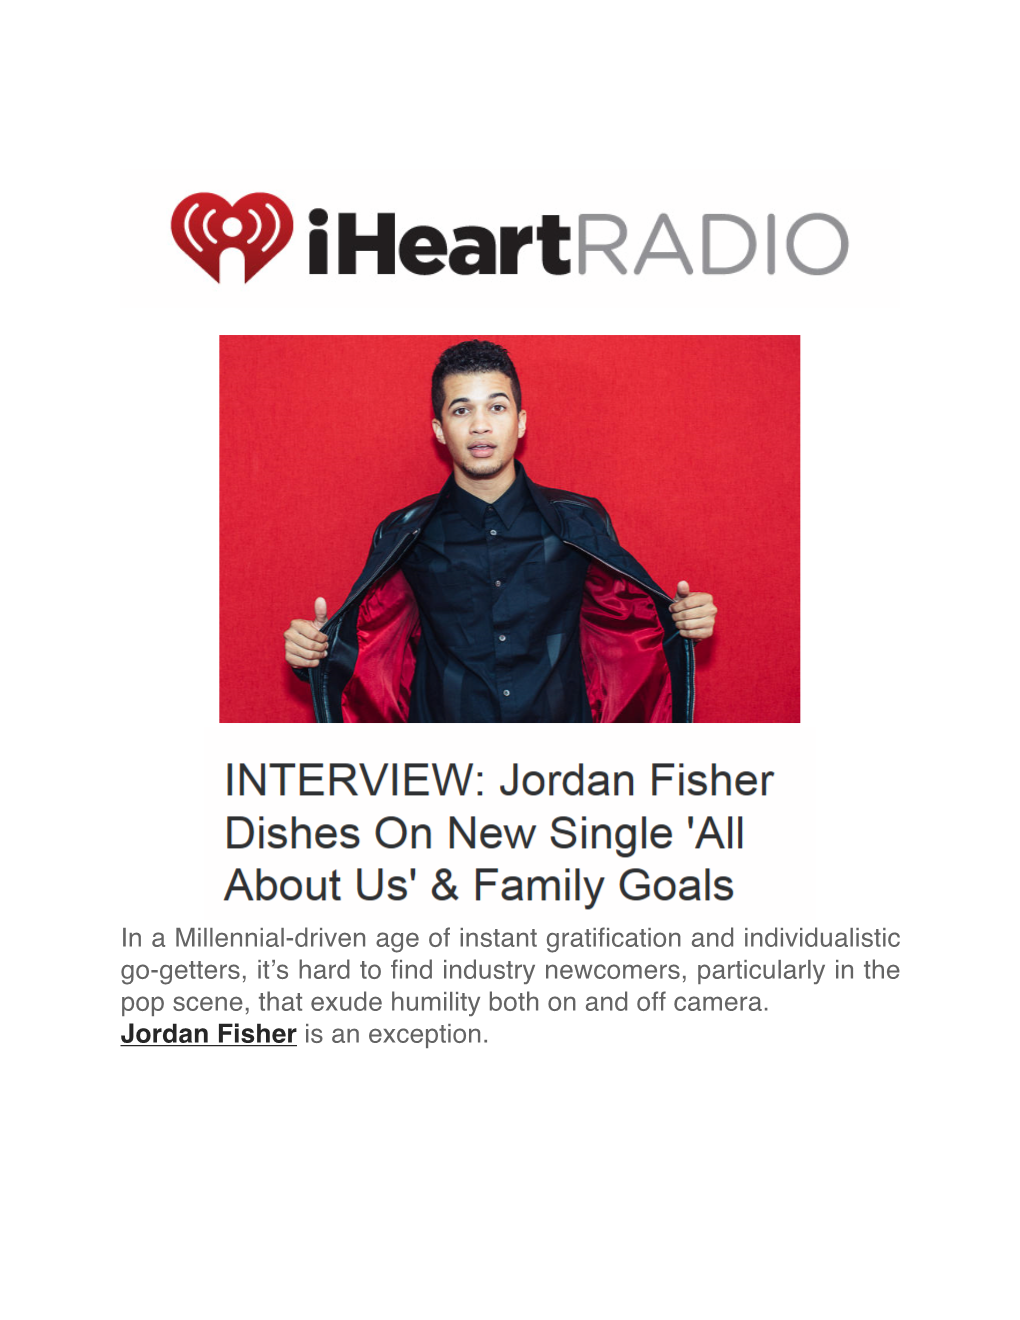 Jordan Fisher Is an Exception